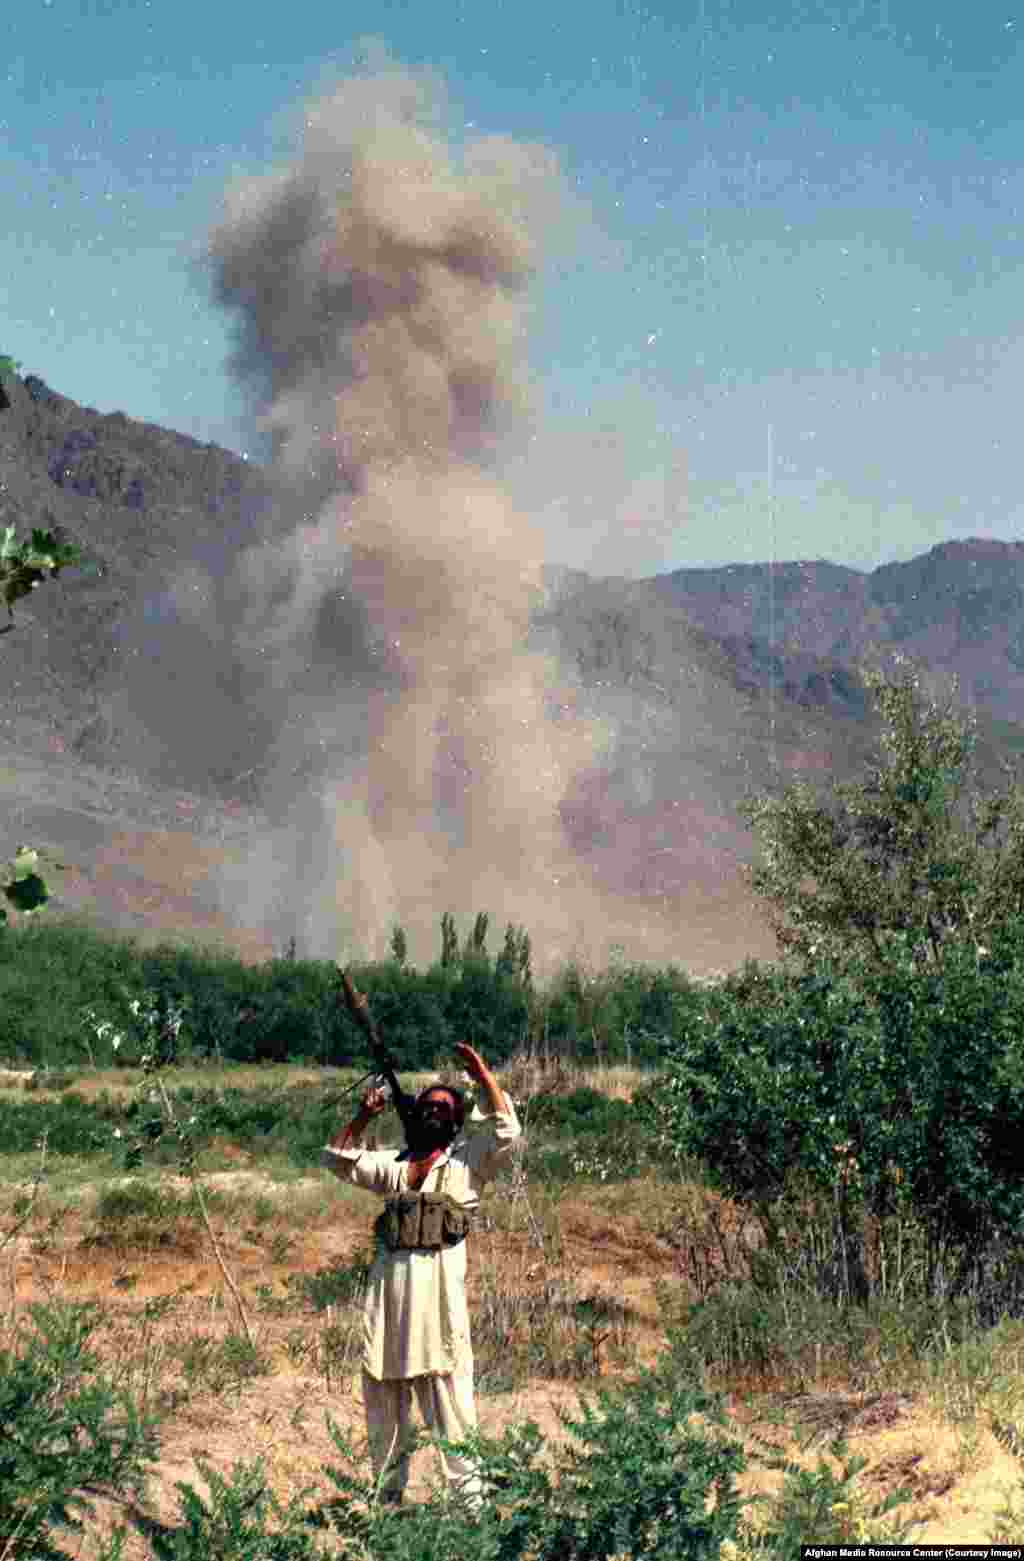 A mujahedin fighter scans the sky after an air strike. As conditions became increasingly risky for foreign journalists inside Afghanistan (in 1984 a Soviet diplomat vowed any journalist caught with mujahedin fighters would be killed), Washington also funded a controversial program to supply Afghan rebels with cameras.